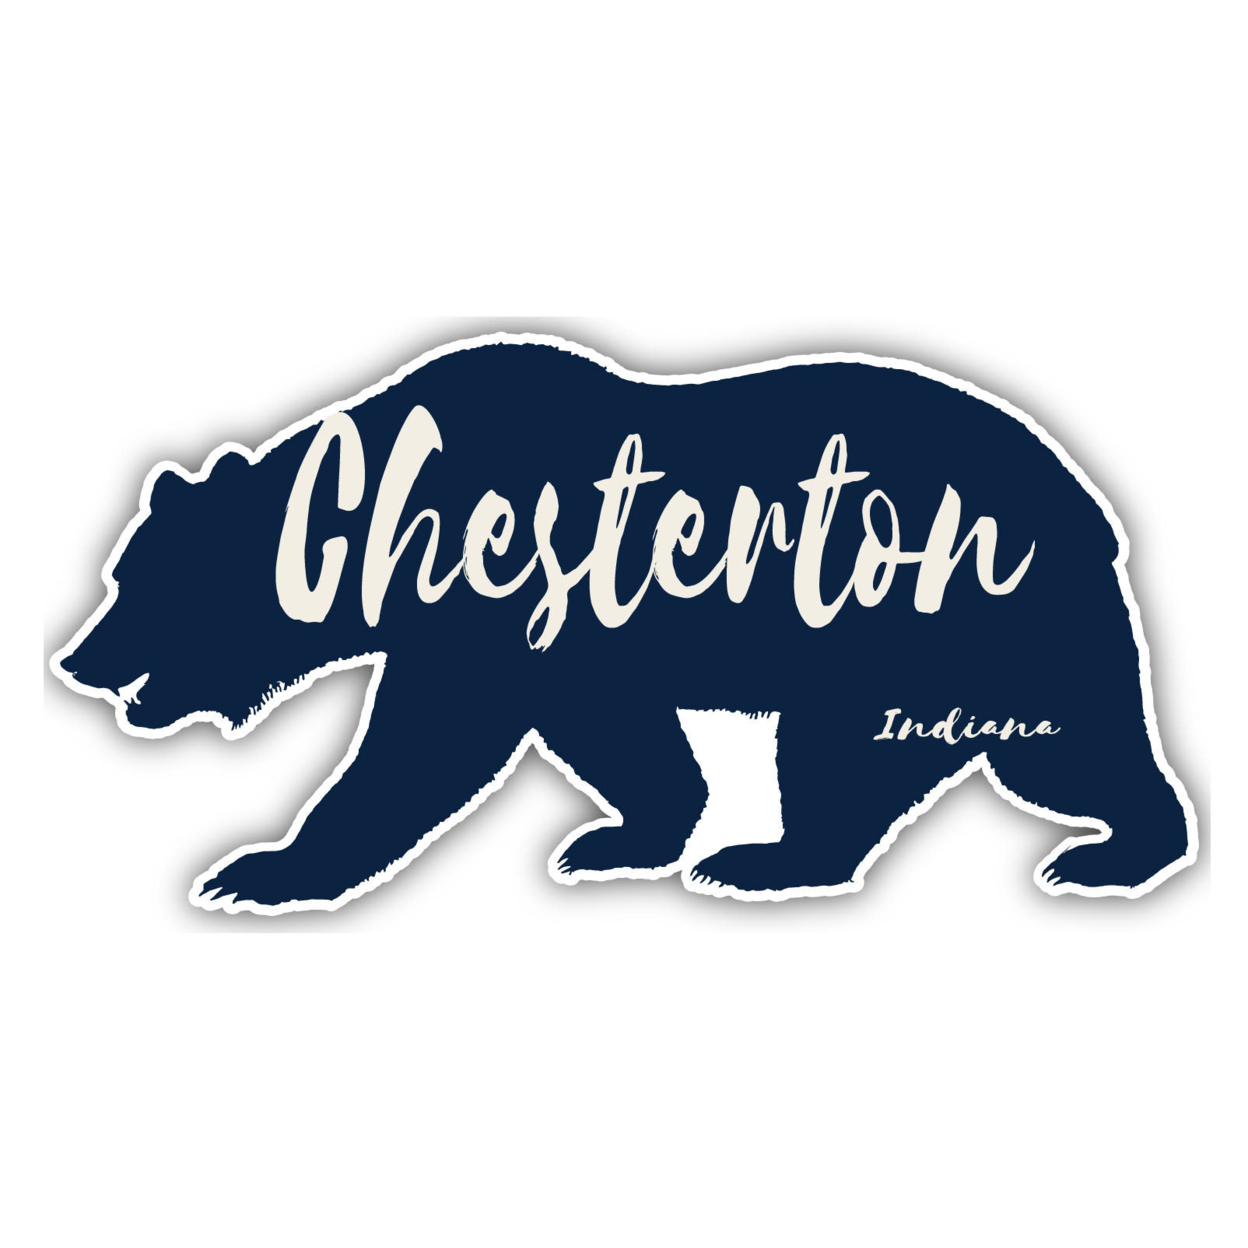 Chesterton Indiana Souvenir Decorative Stickers (Choose Theme And Size) - 4-Pack, 4-Inch, Tent